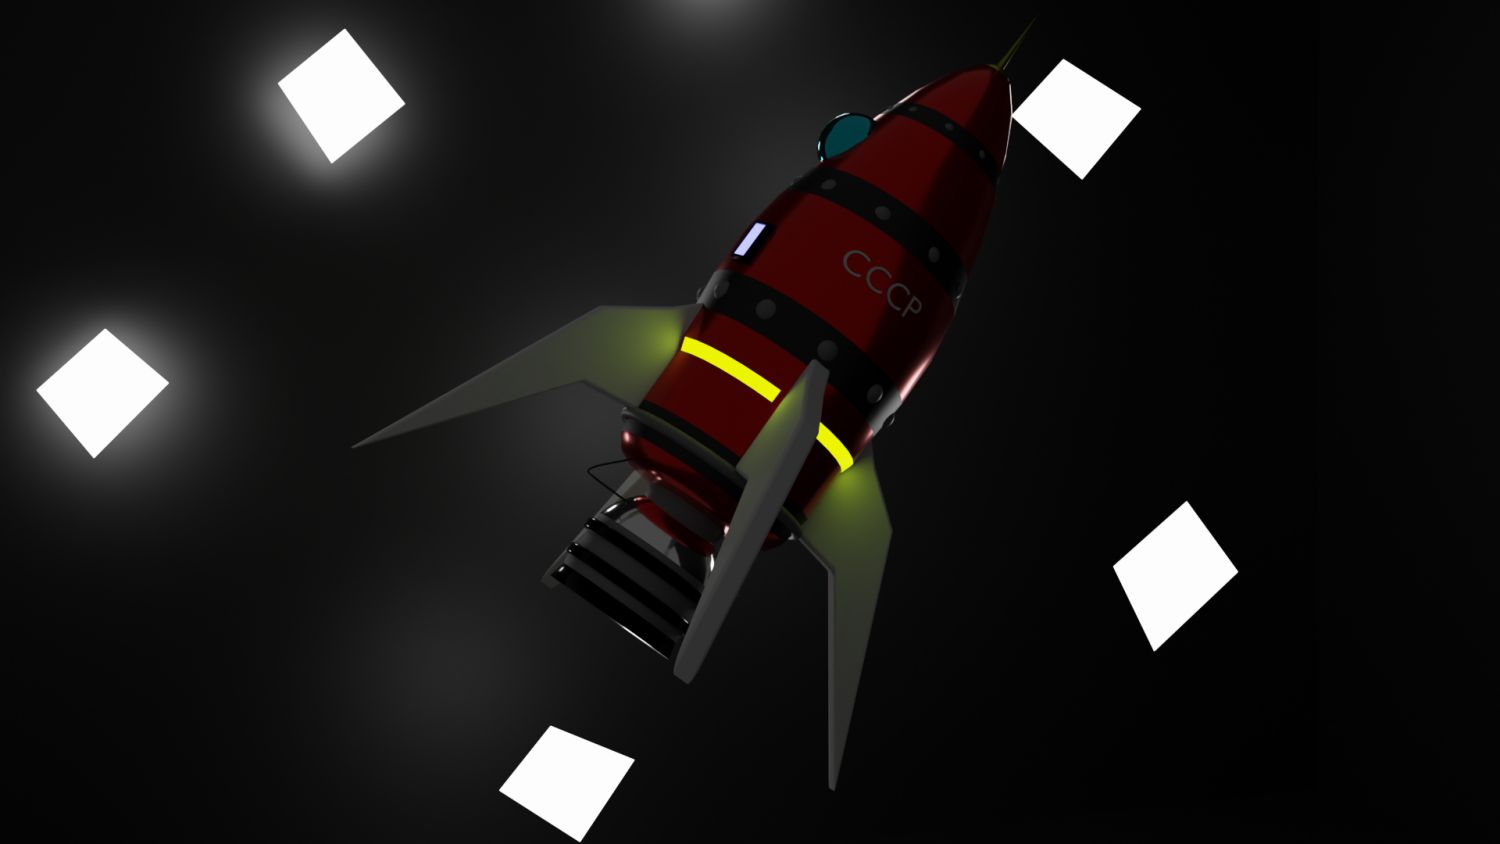 animated space rocket